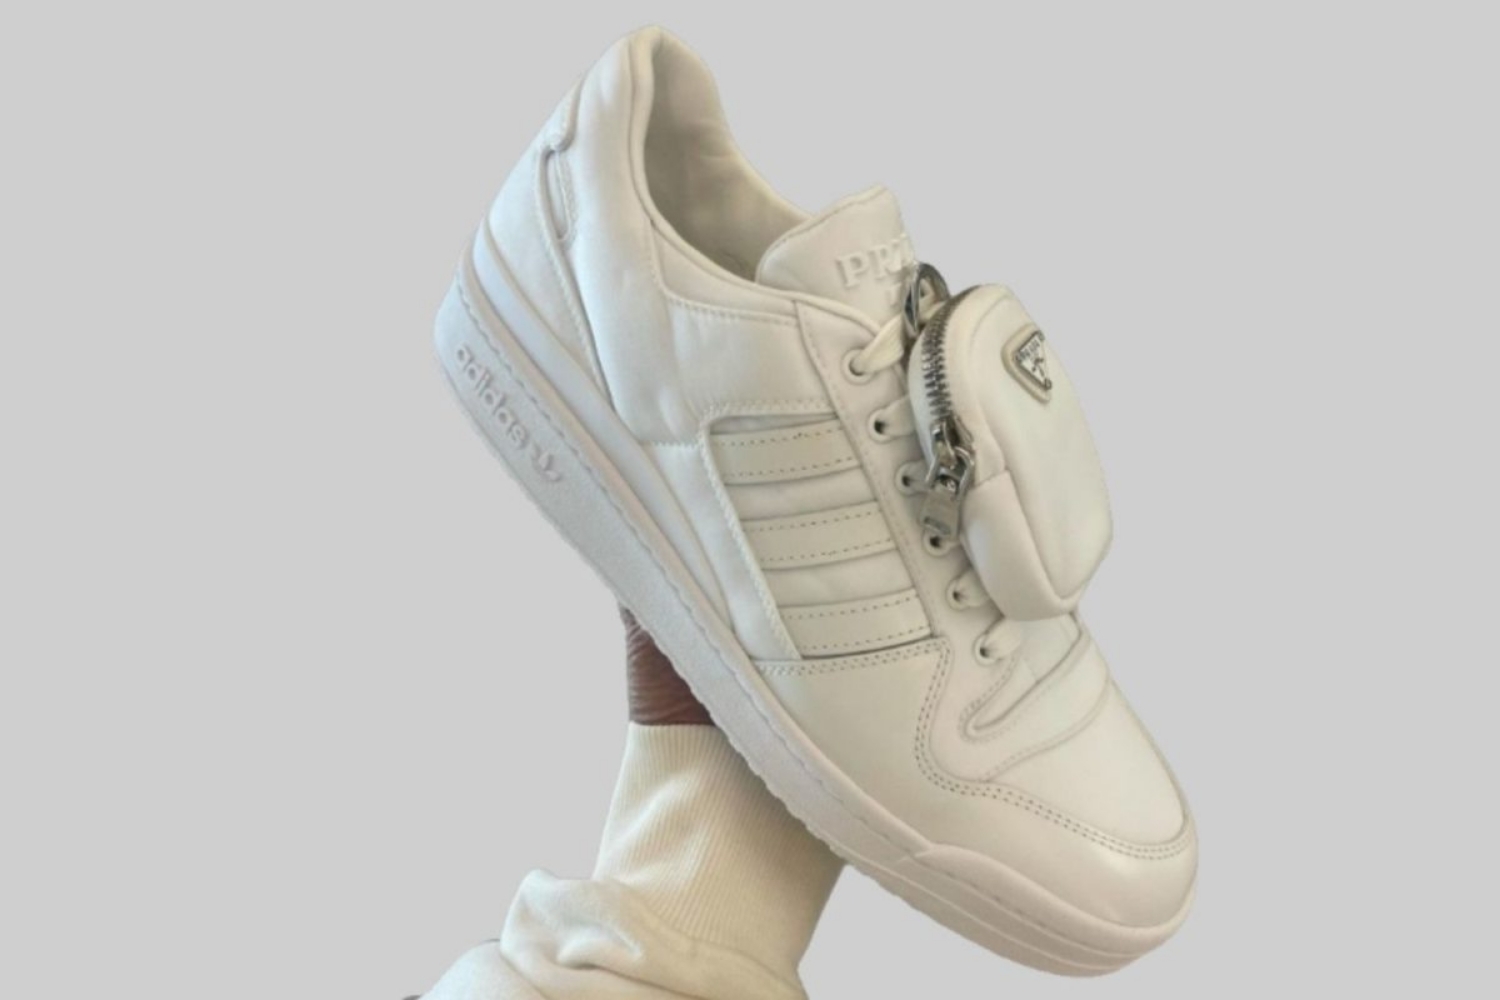 New images surfaced of Prada x adidas Forum Low